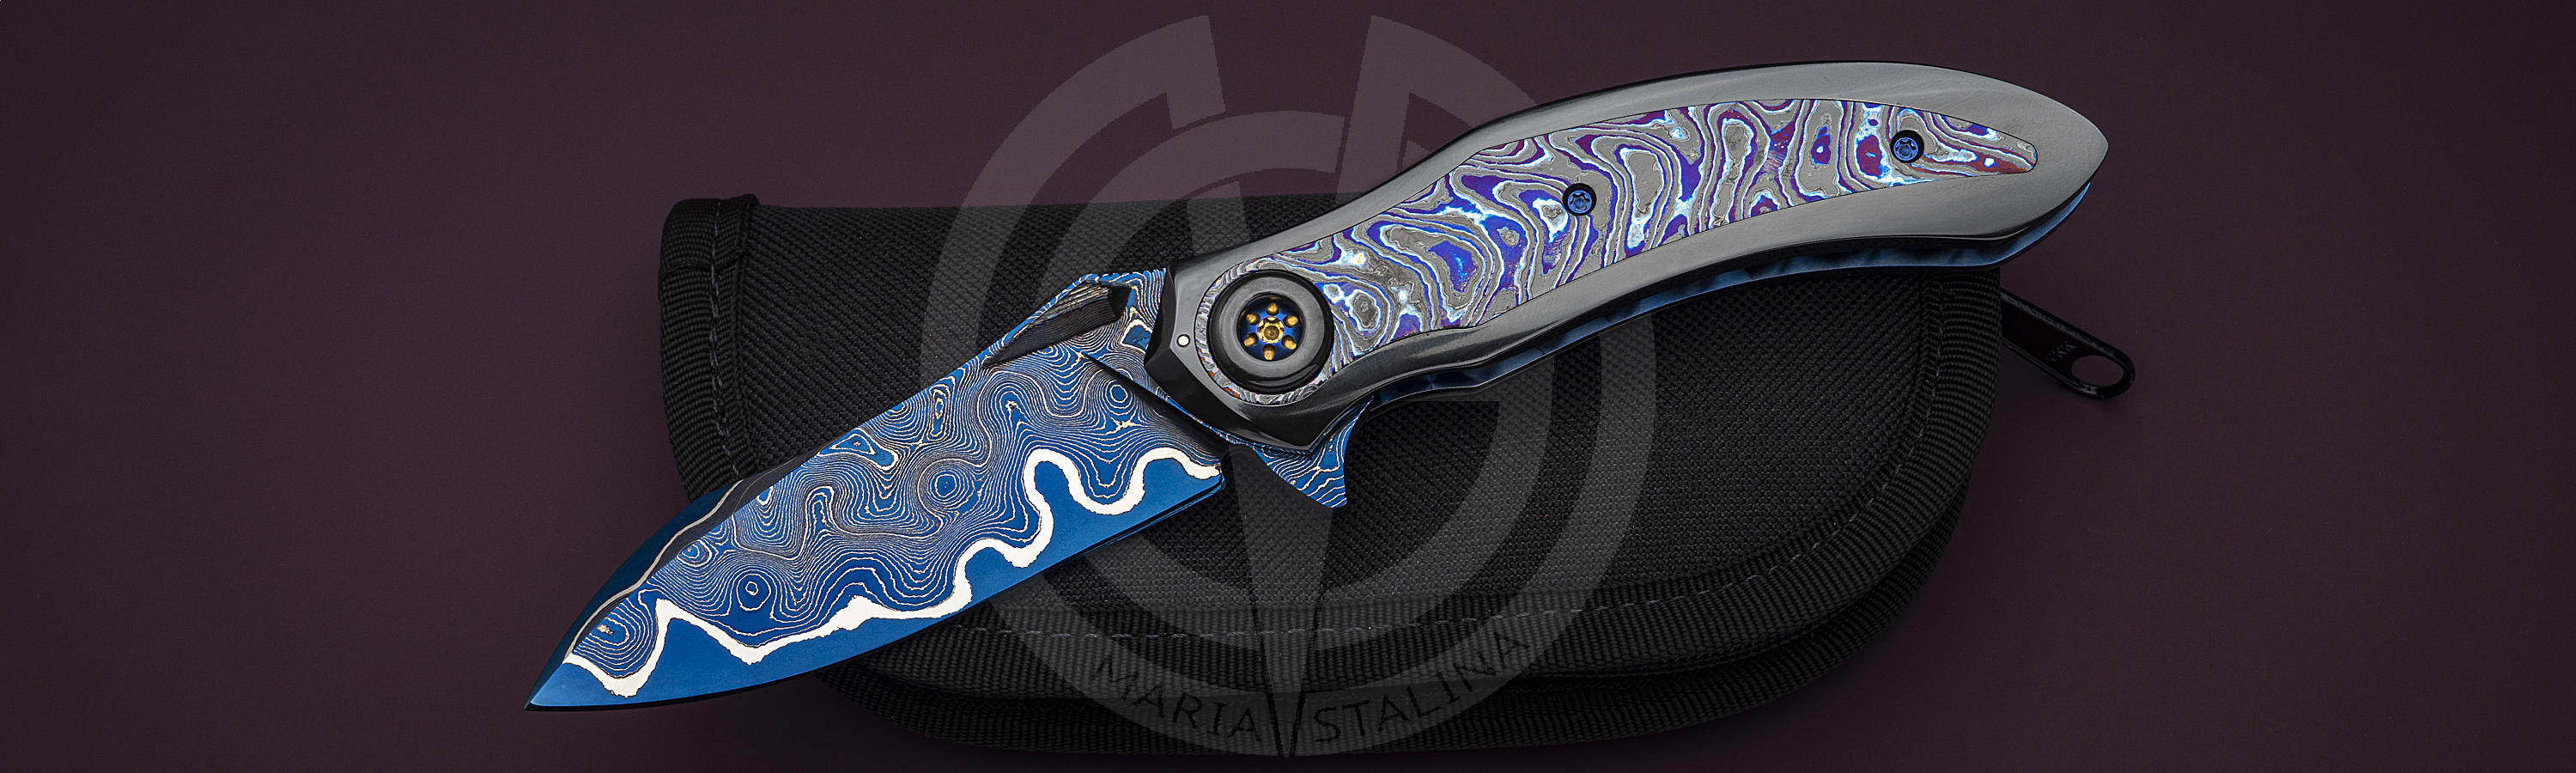 Custom collectible knife